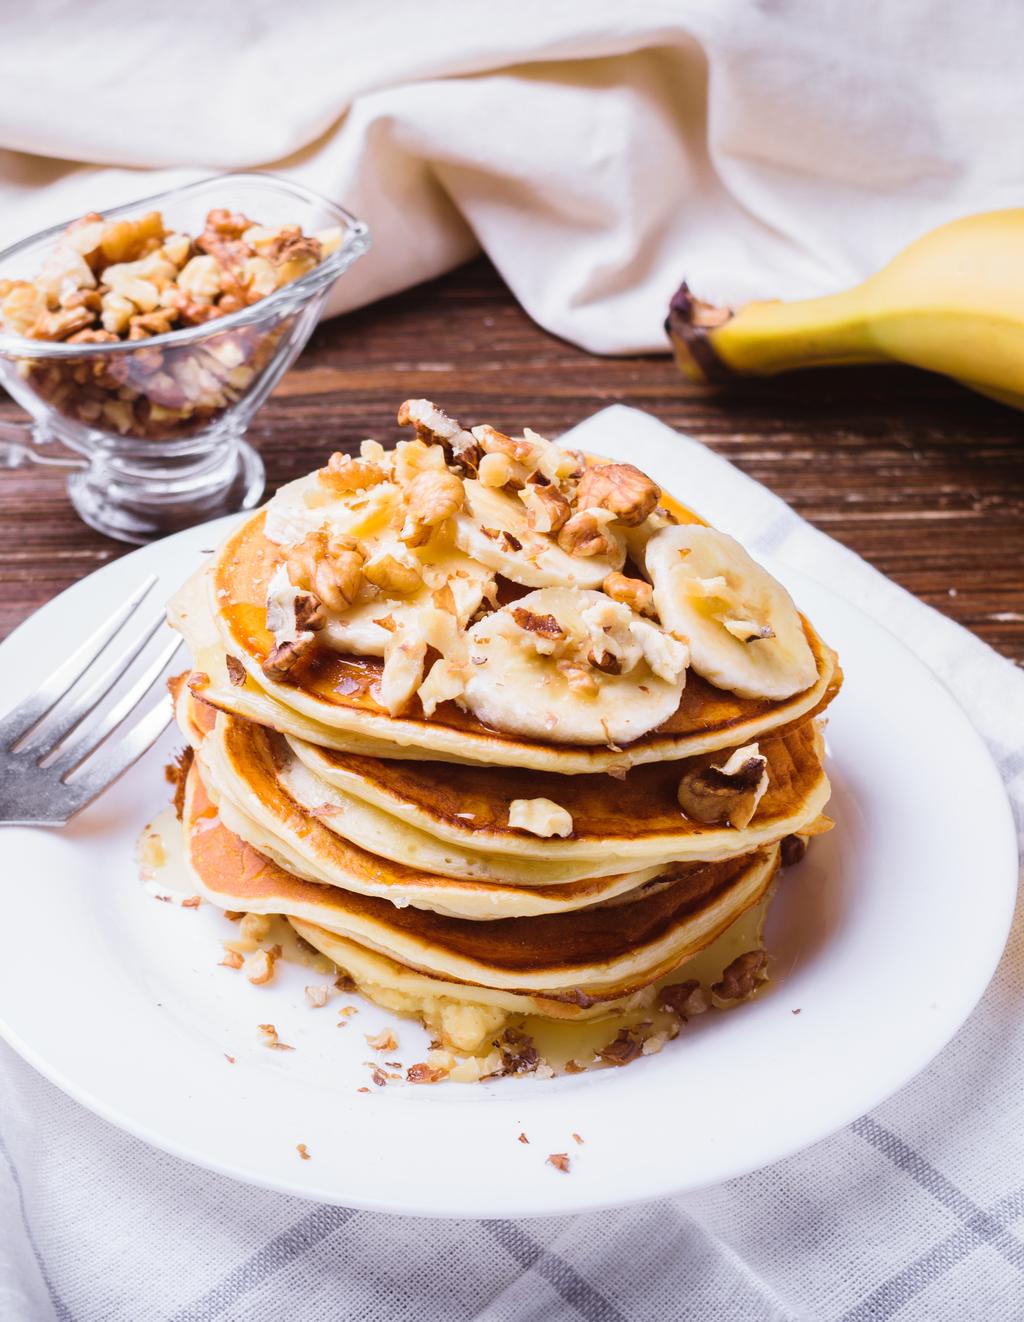 BANANA OATMEAL PANCAKES Submitted by Varneega T.